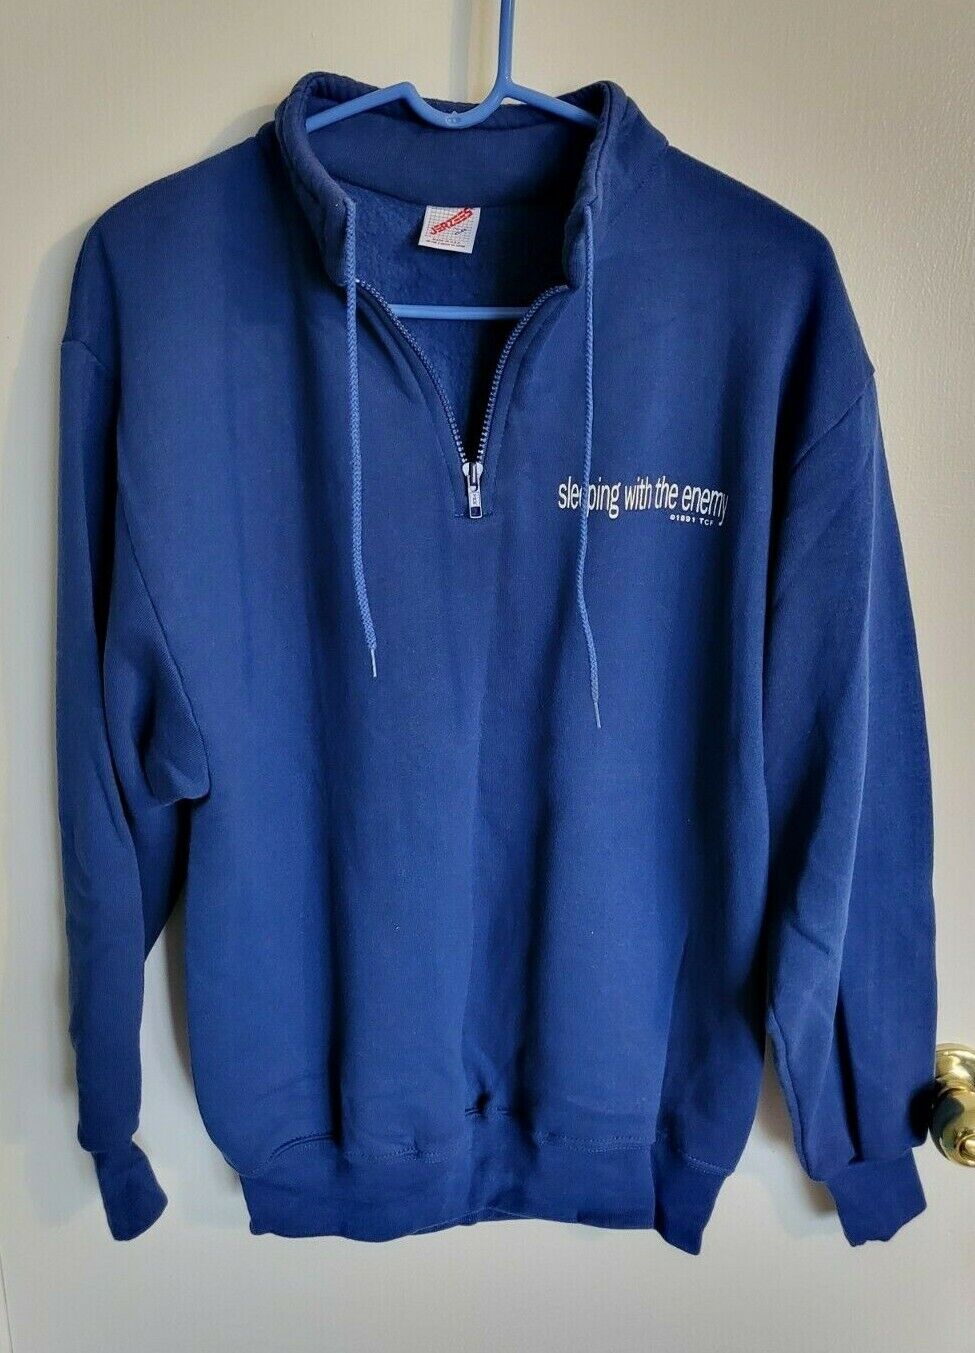 Vintage 1991 Sleeping With The Enemy Blue Movie Film Promo Pullover Jerzees L